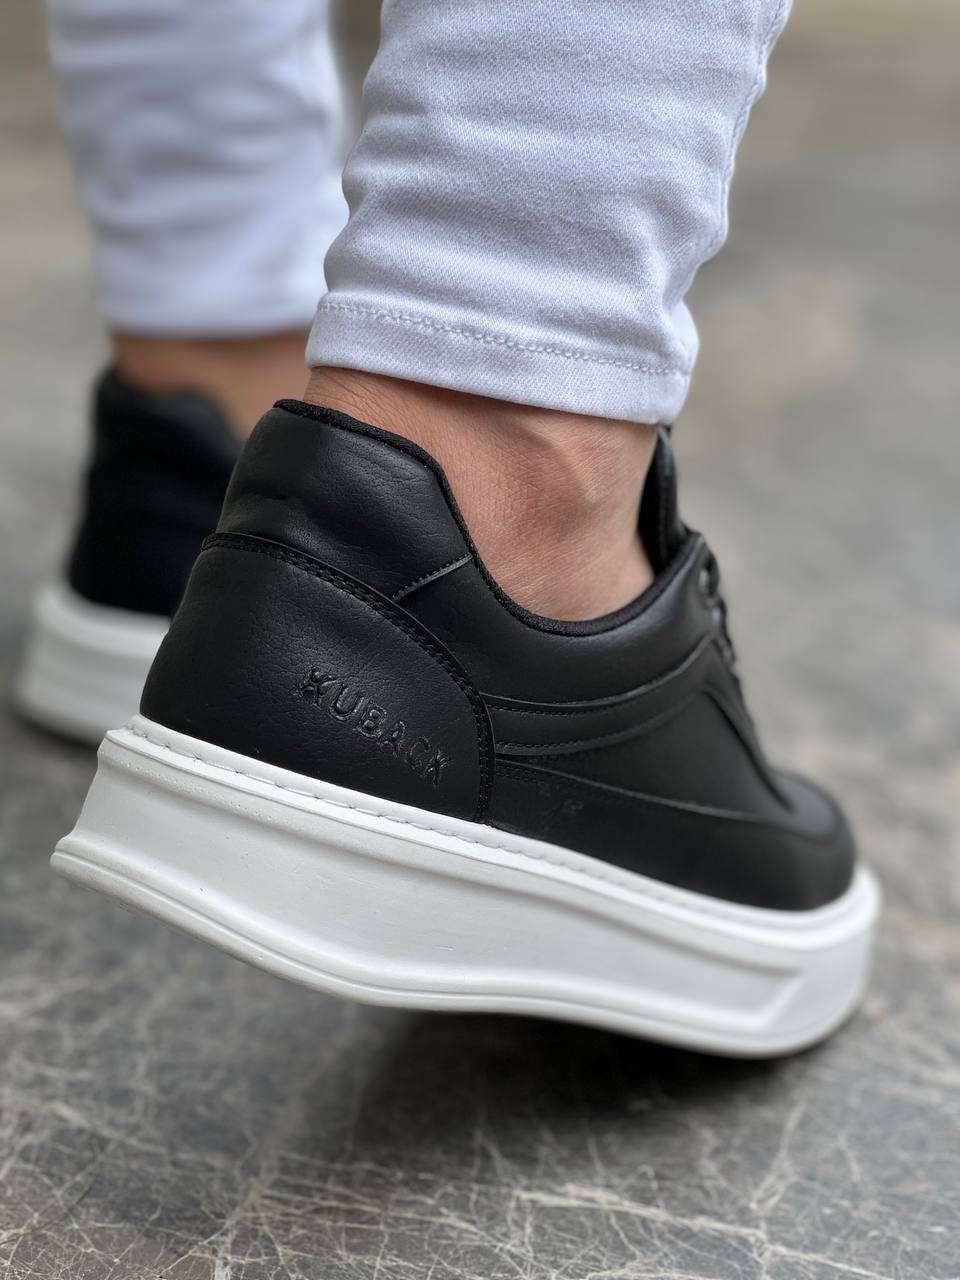 KB-006 Black Skin High Sole Laced Casual Men's Shoes - STREETMODE ™